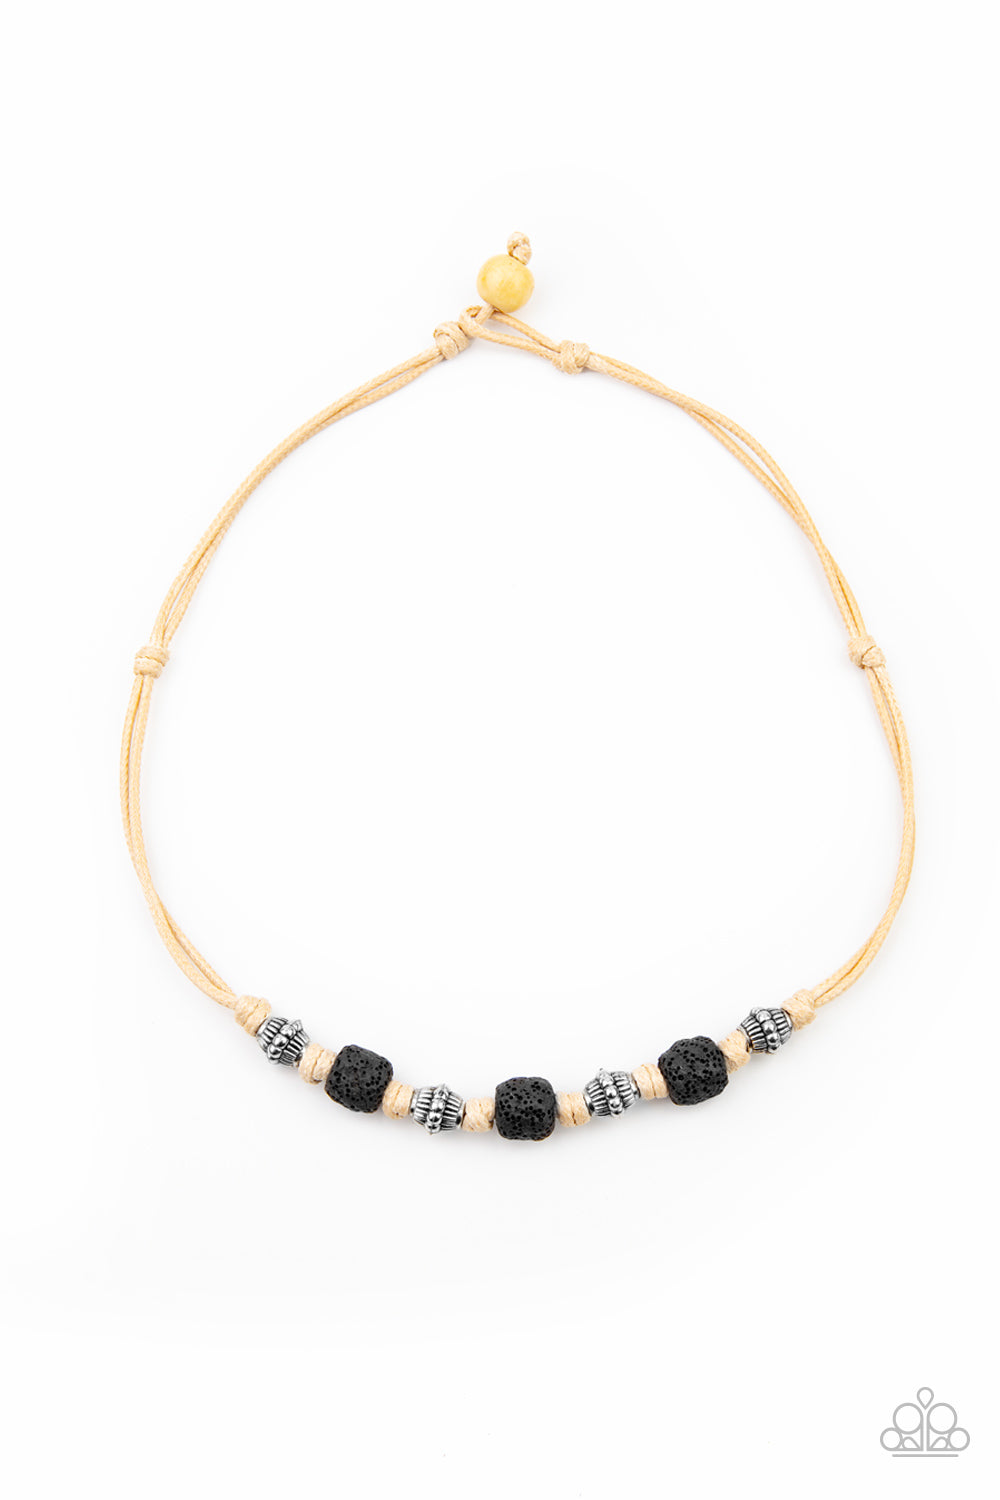 Decorative silver beads and pieces of black pumice-like rock are knotted in place below the collar for a seasonal look. Features a button loop closure.